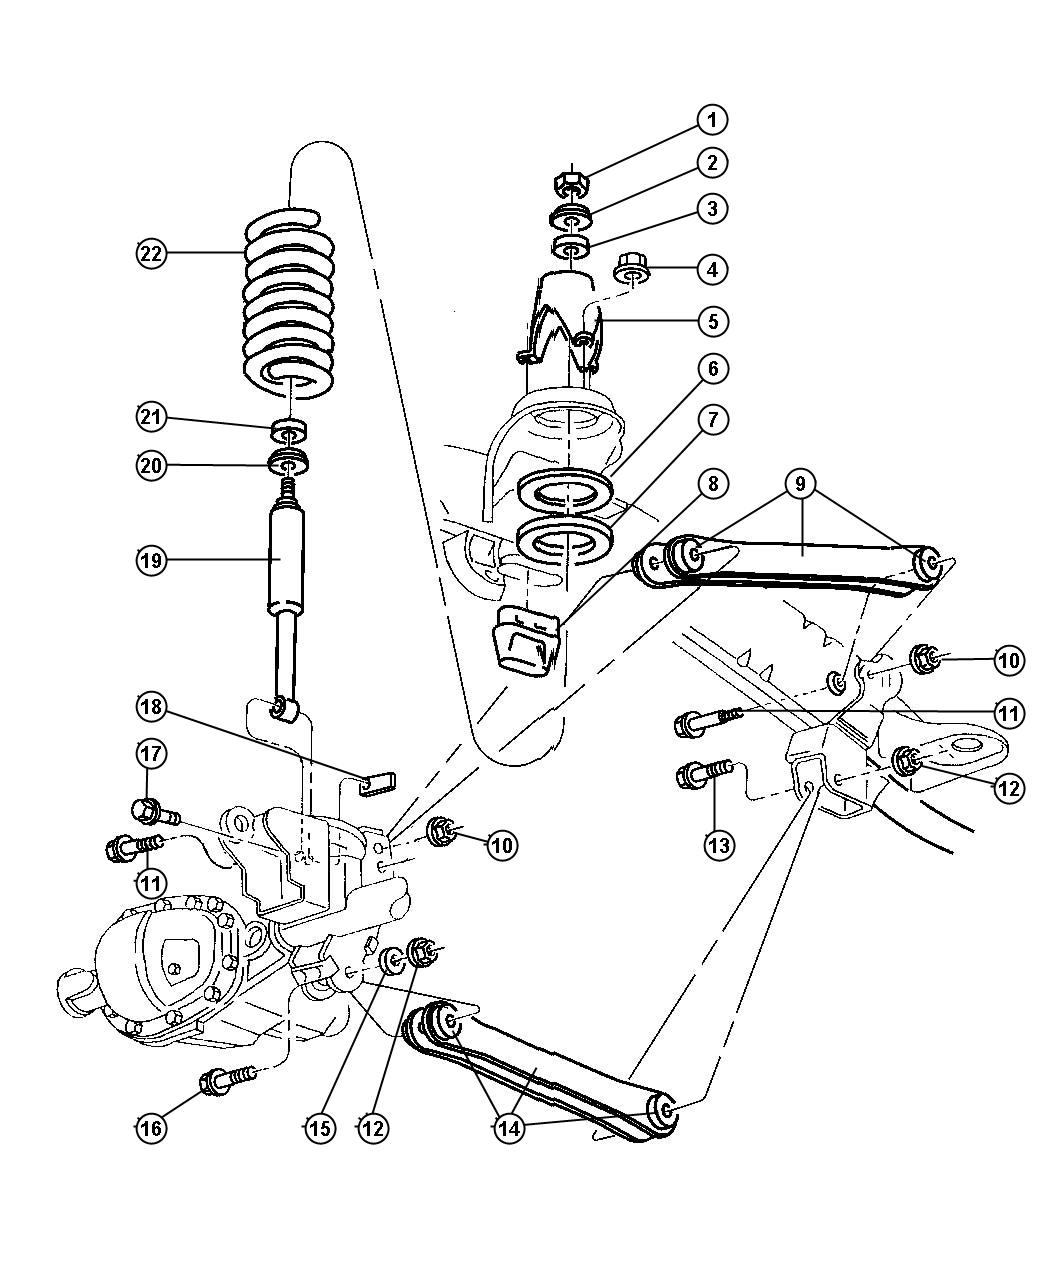 Diagram Upper and Lower Control Arms,Springs and Shocks,BE 6,7,8. for your 2016 Dodge Dart   